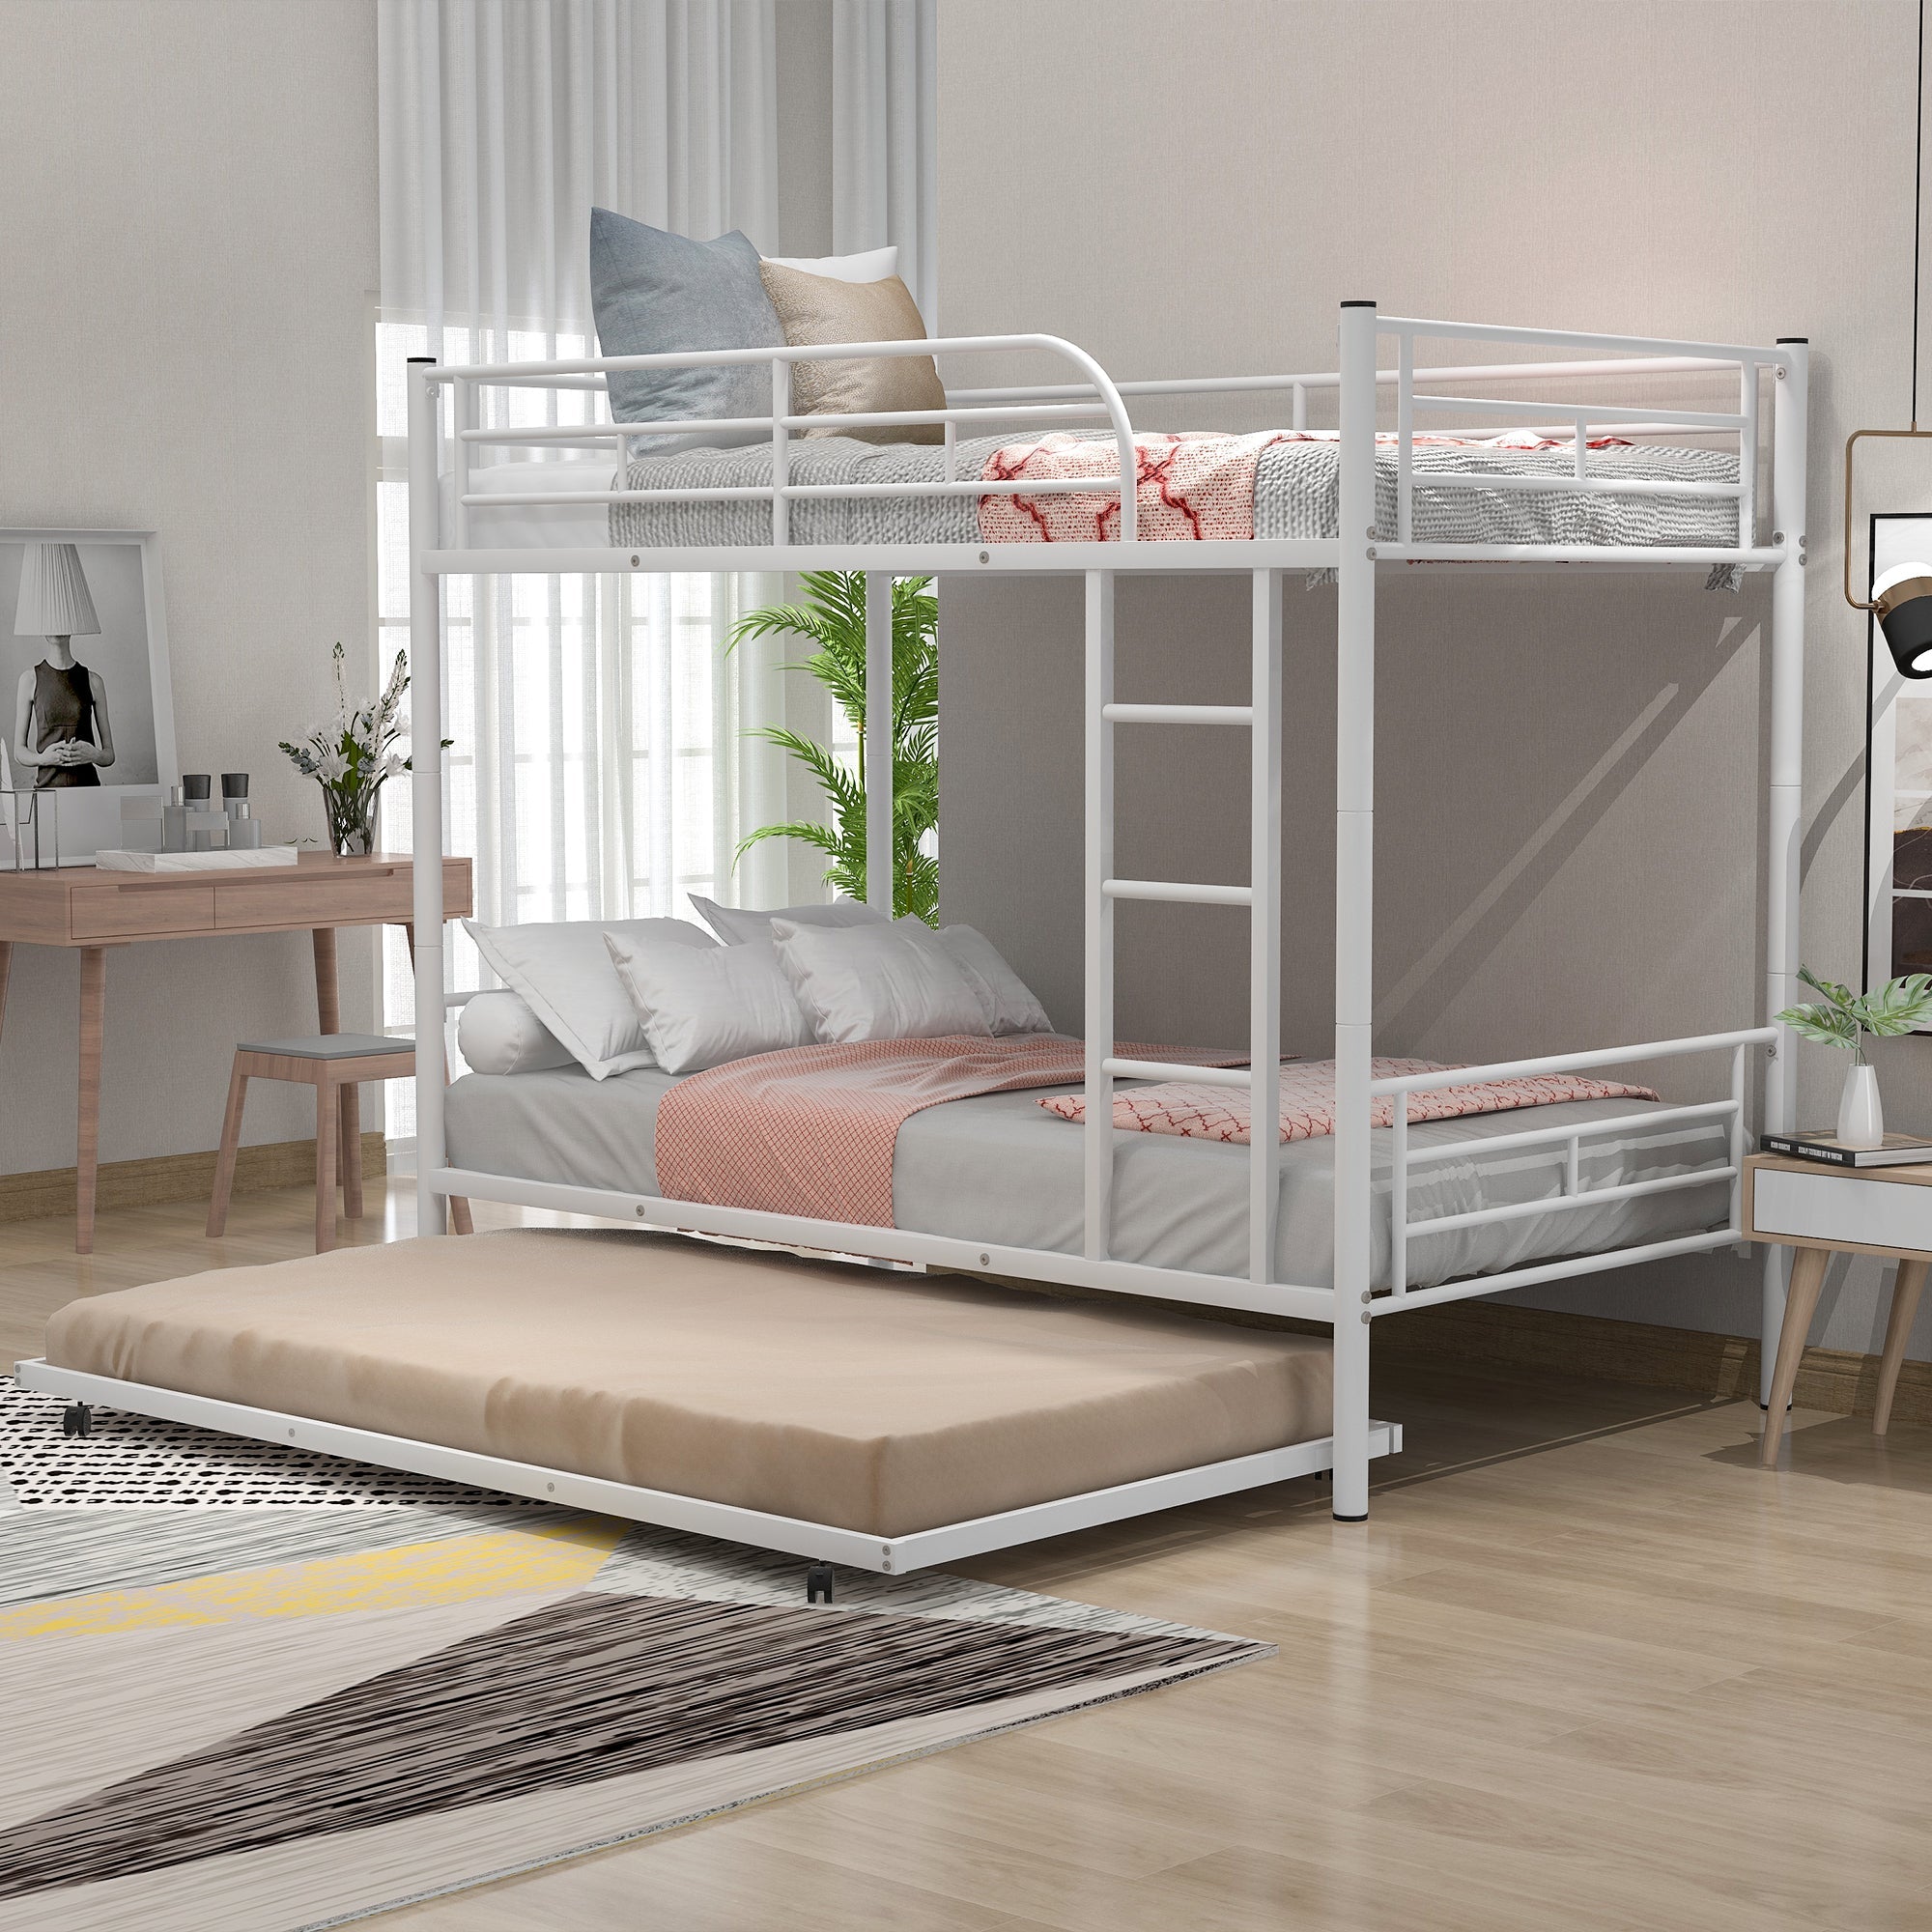 Heavy Duty Bunk Bed Frame, Kids Twin Over Twin Metal Bunk Bed with Flat Ladder & Safety Guardrail, Convertible Trundle Bunk Bed Frame, for Dorm, Bedroom, Guest Room, No Box Spring Needed, White, D8076